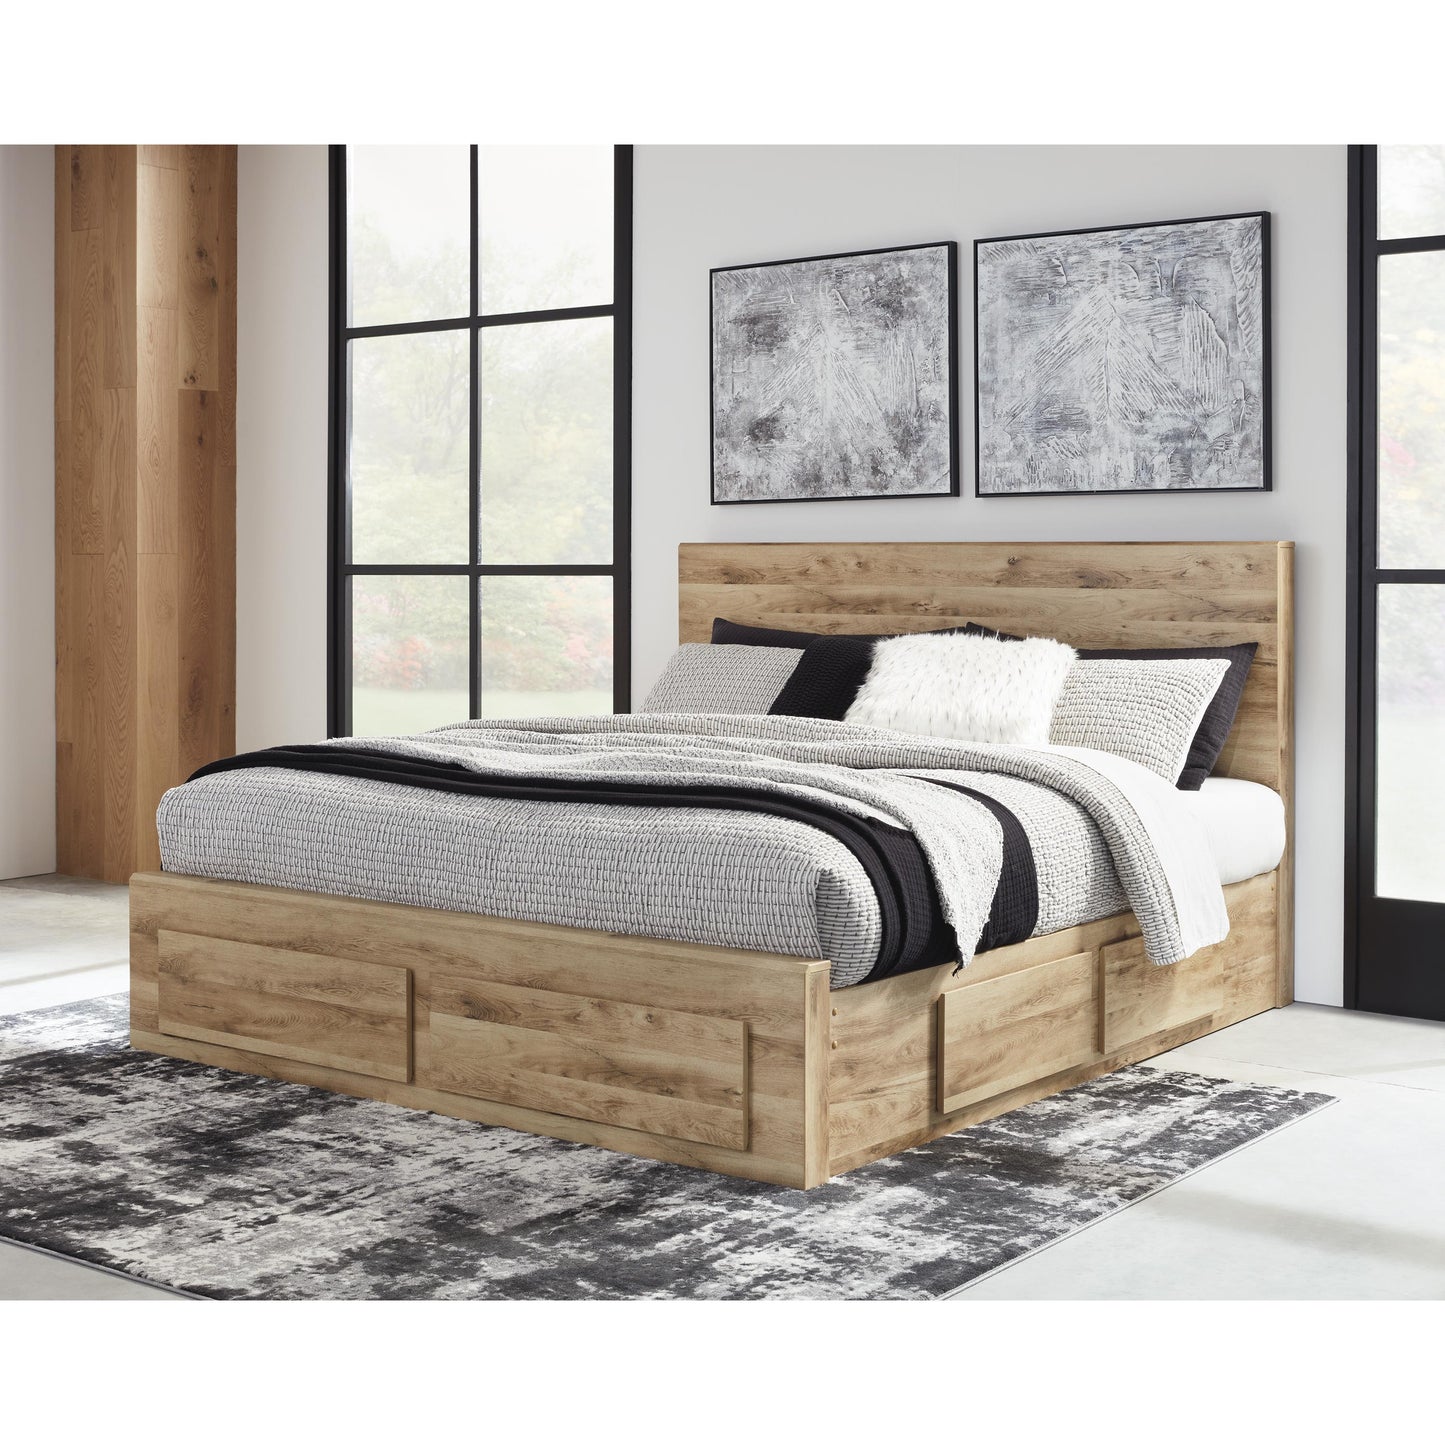 Signature Design by Ashley Hyanna King Panel Bed with Storage B1050-58/B1050-56S/B1050-60/B1050-95/B100-14 IMAGE 5